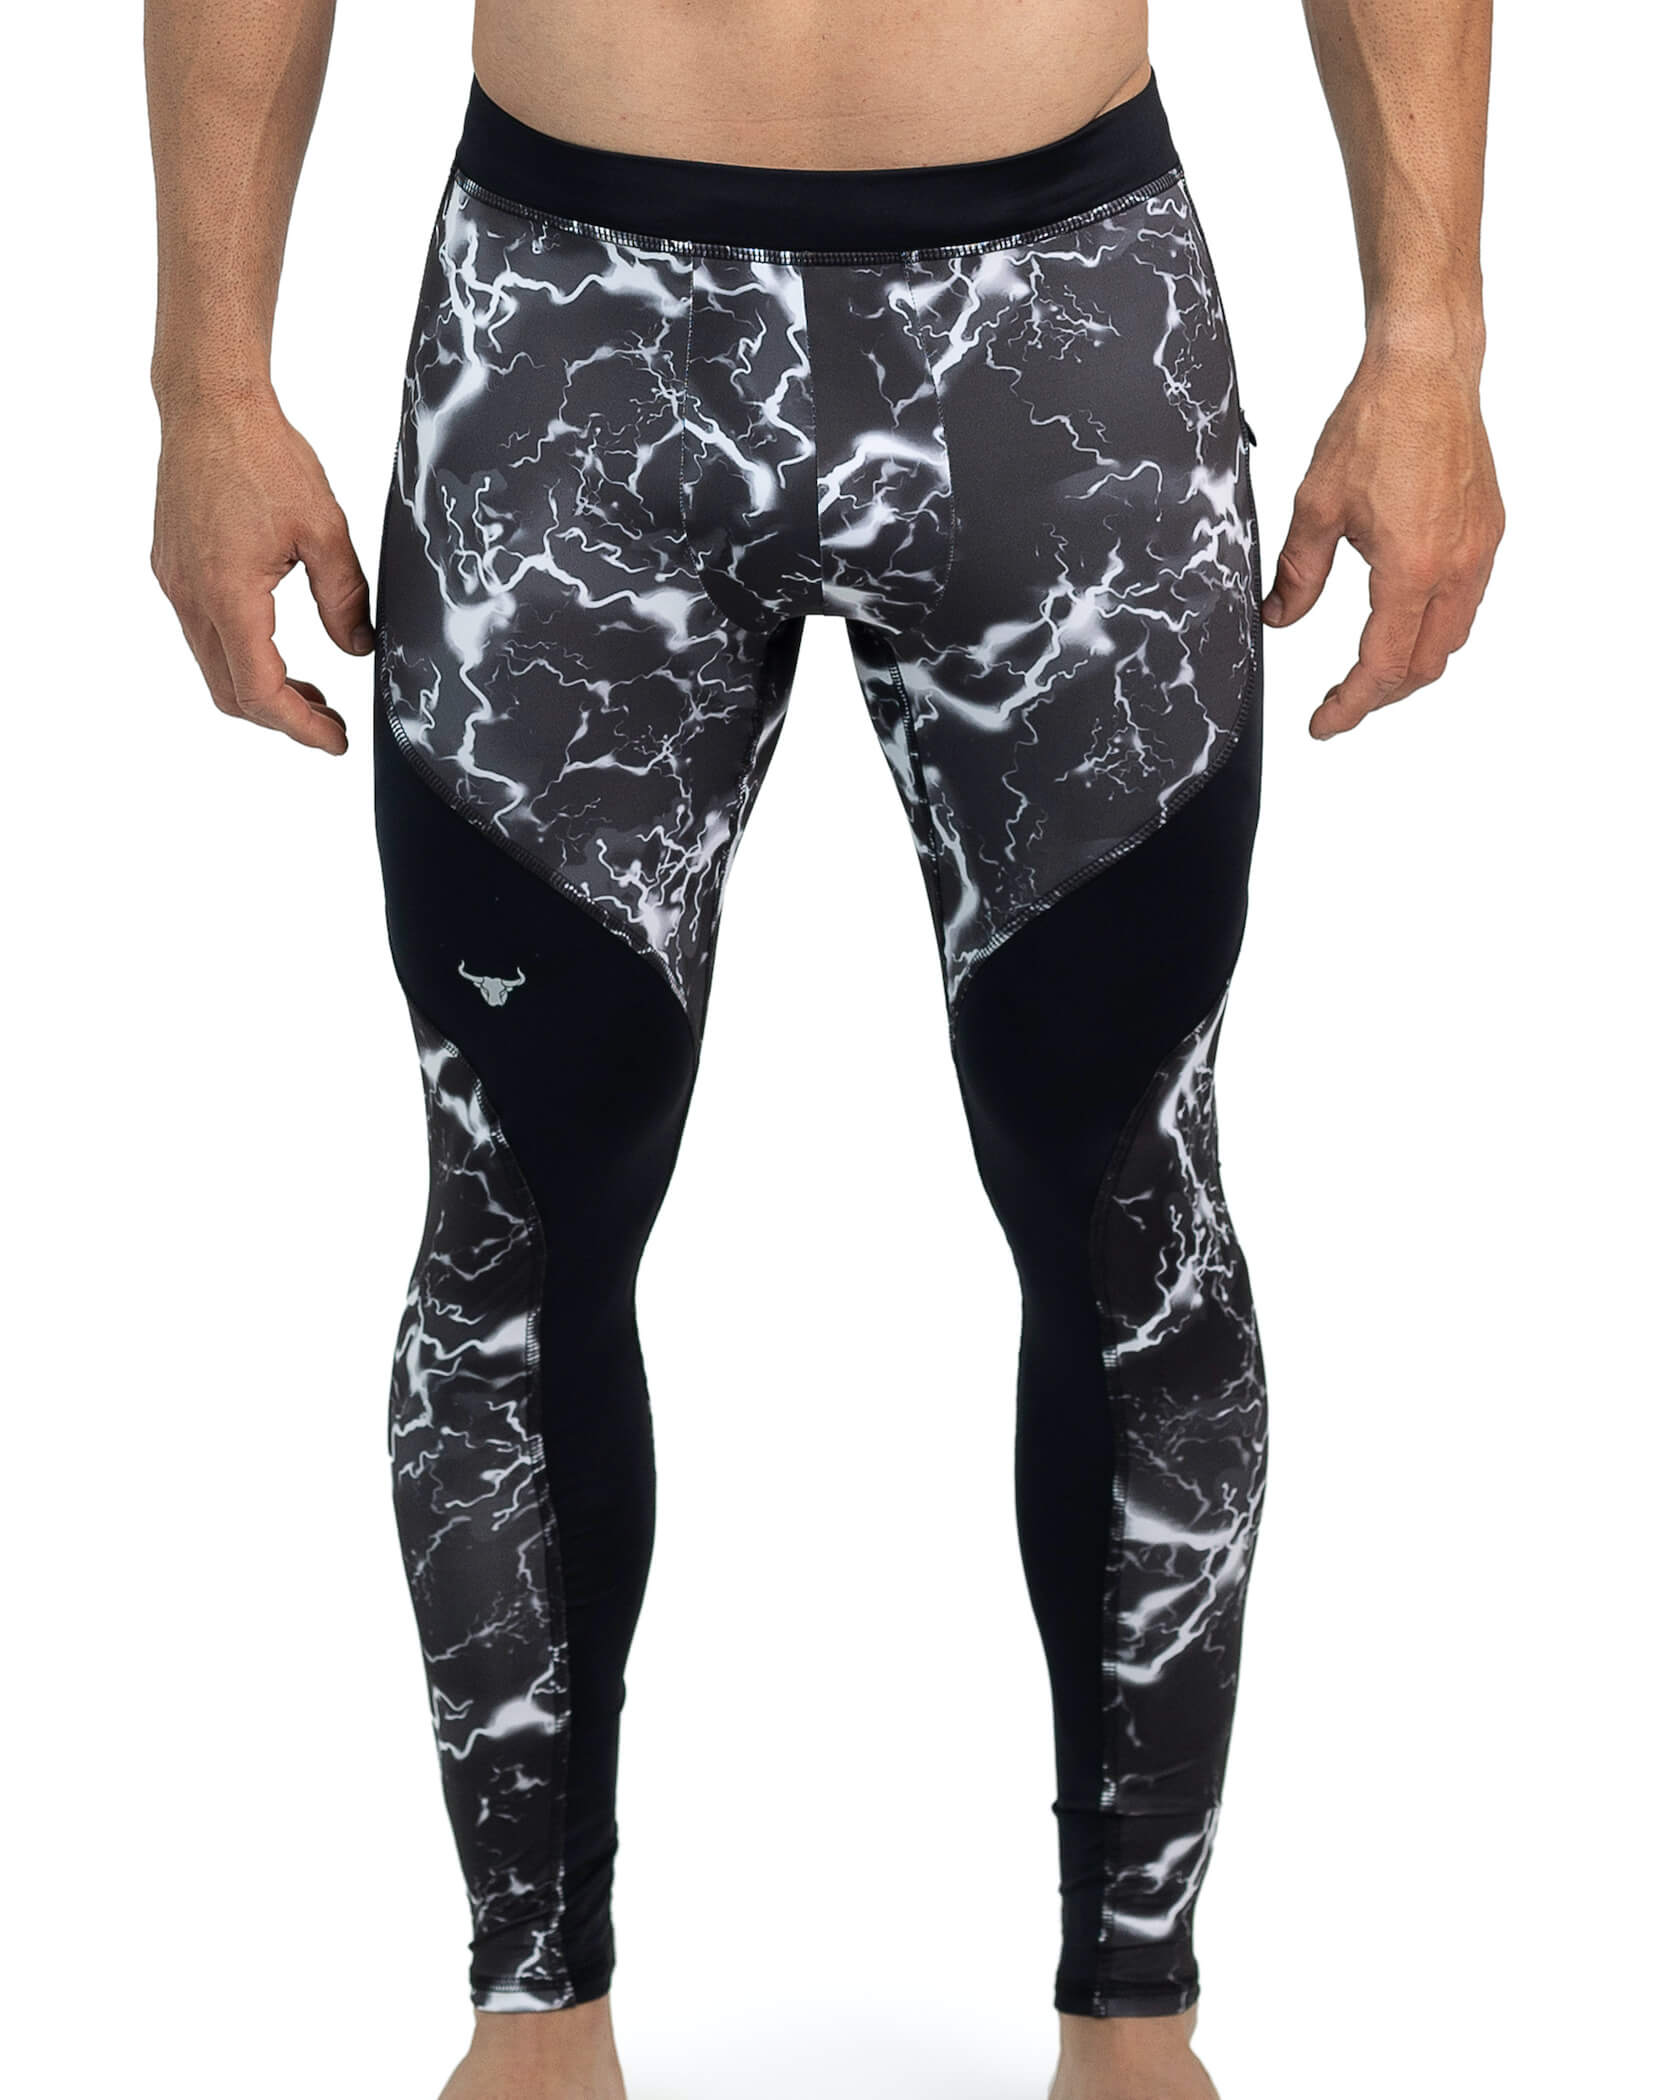 The 12 Best Men's Leggings, Tights and Compression Pants for Workouts